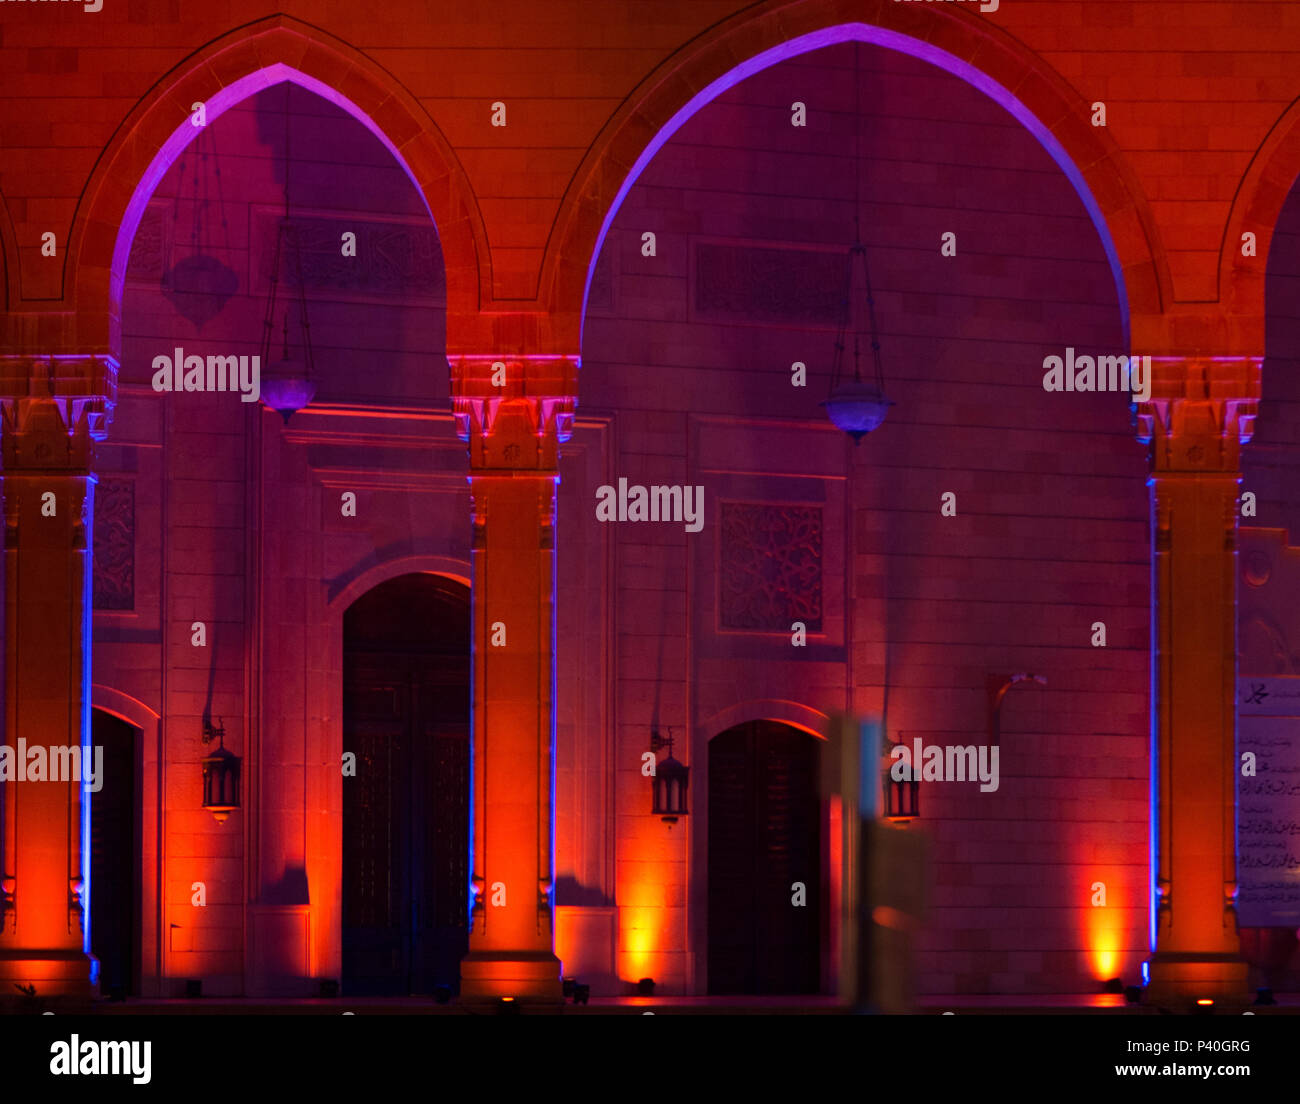 Red-purple lit arches of the Al Omari Mosque in Beirut (Lebanon) Stock Photo